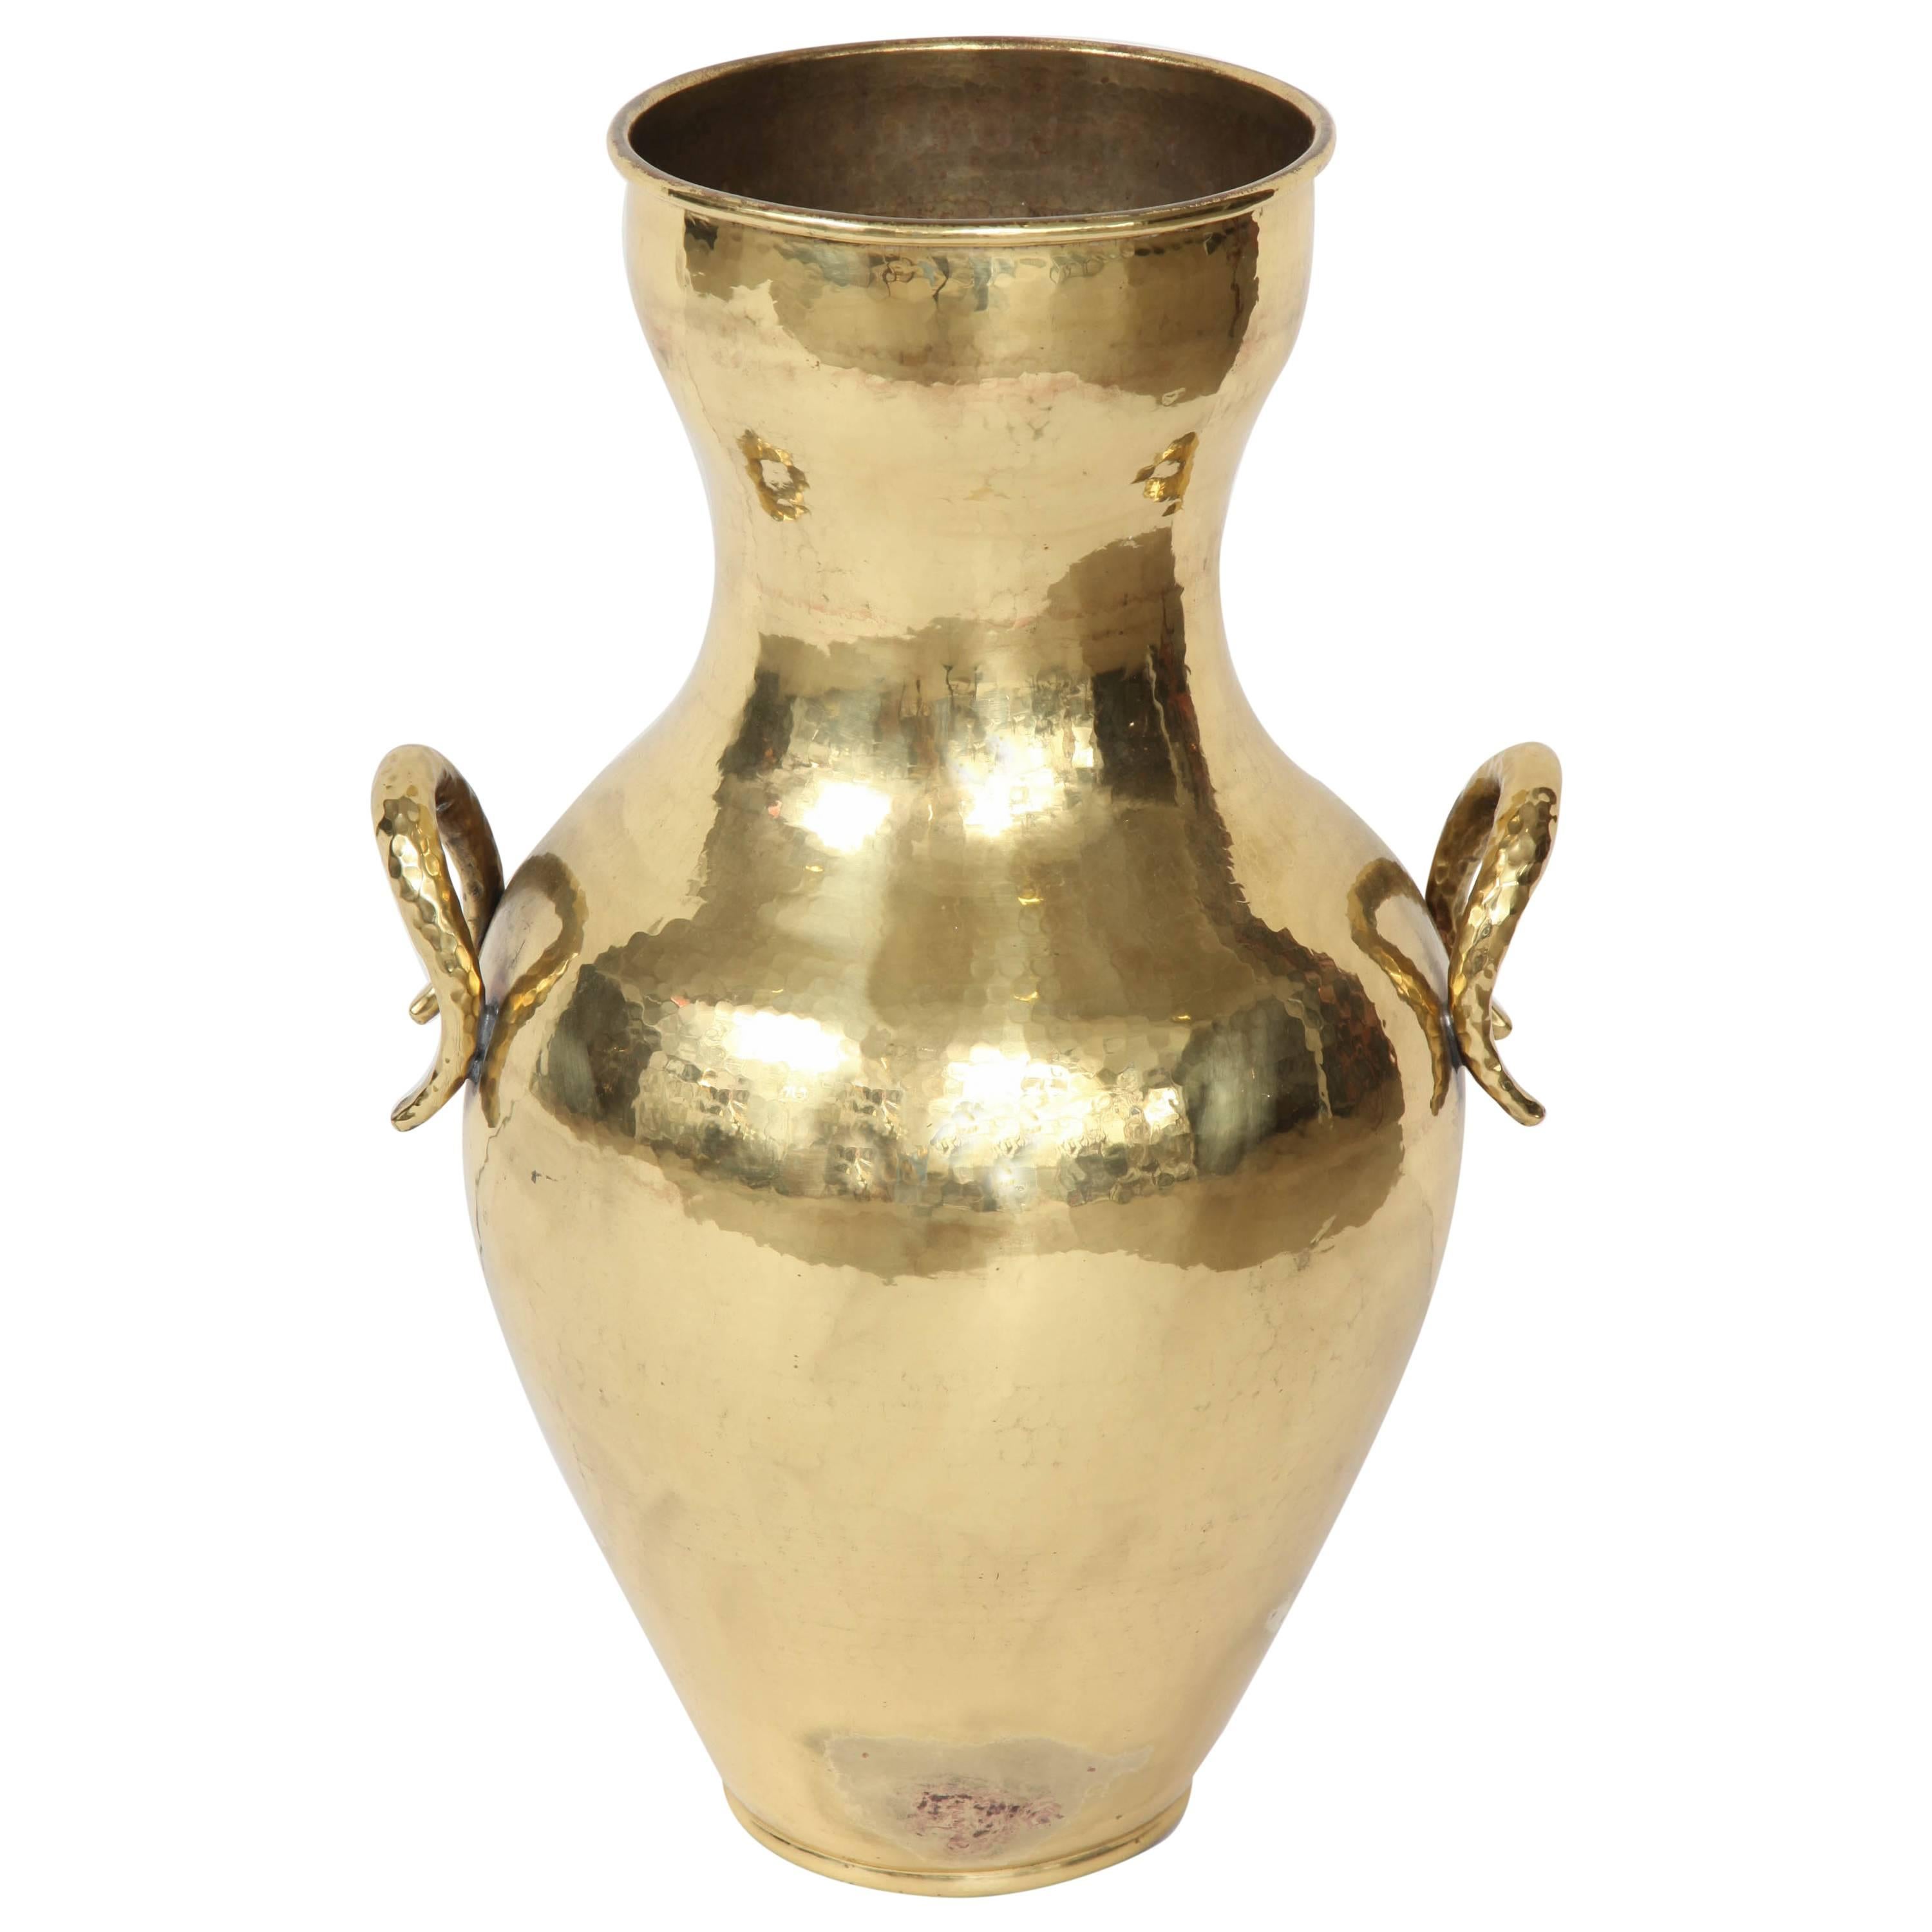  Large 1950s Italian Hand-Hammered Brass Two Handled Urn